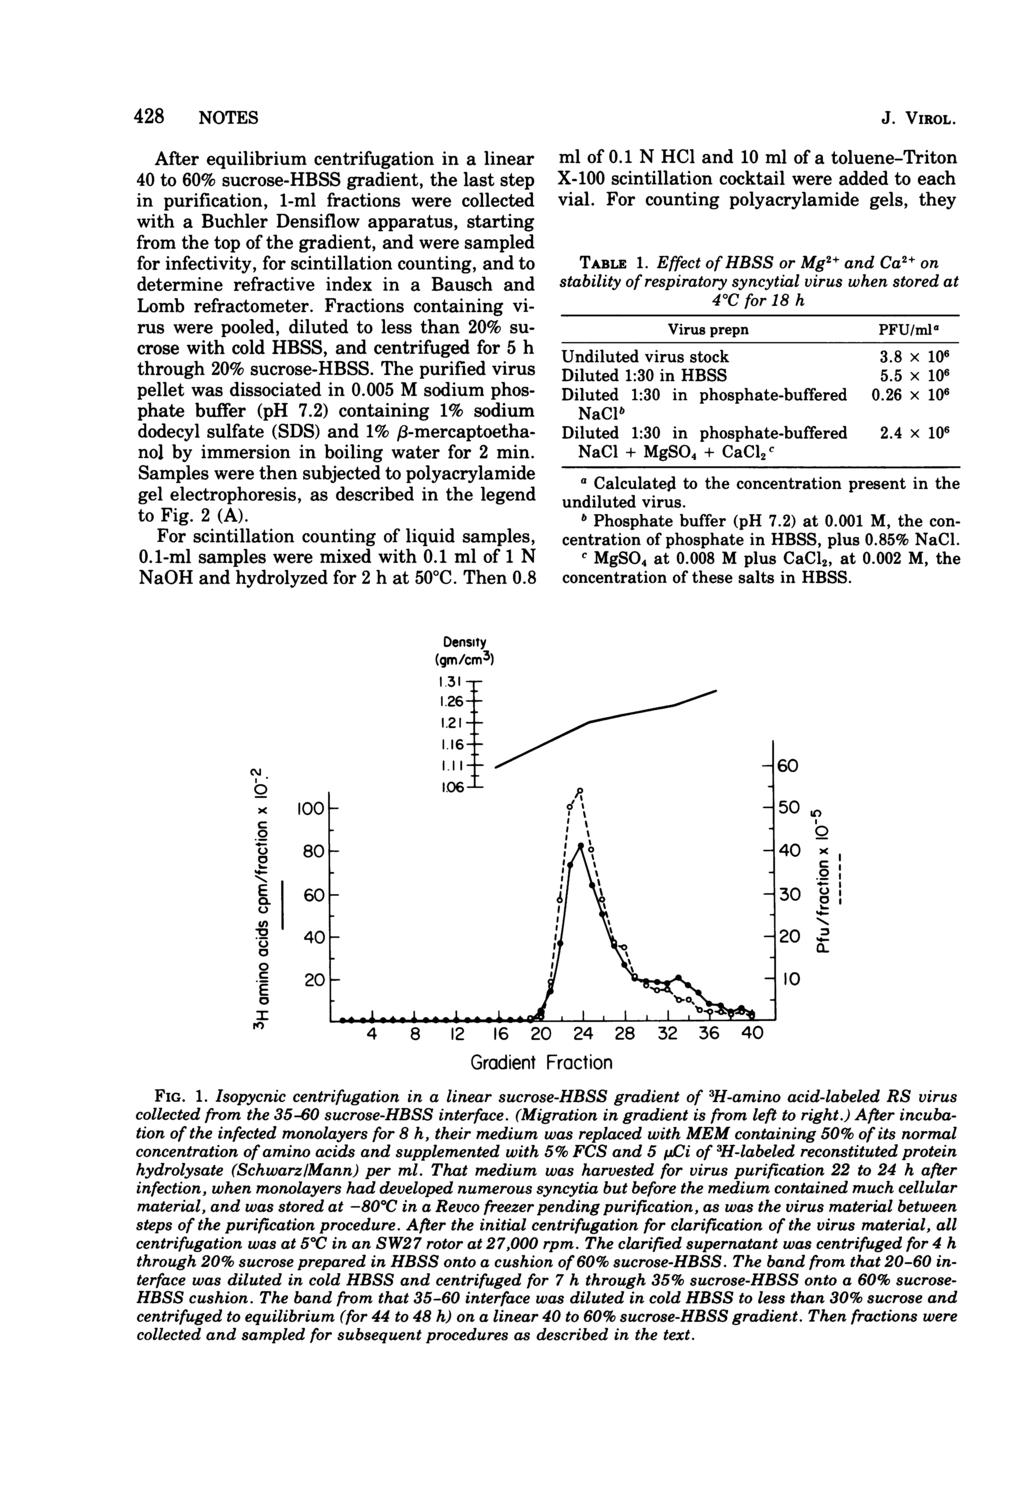 428 NOTES After equilibrium centrifugation in a linear 4 to 6% sucrose-hbss gradient, the last step in purification, 1-ml fractions were collected with a Buchler Densiflow apparatus, starting from